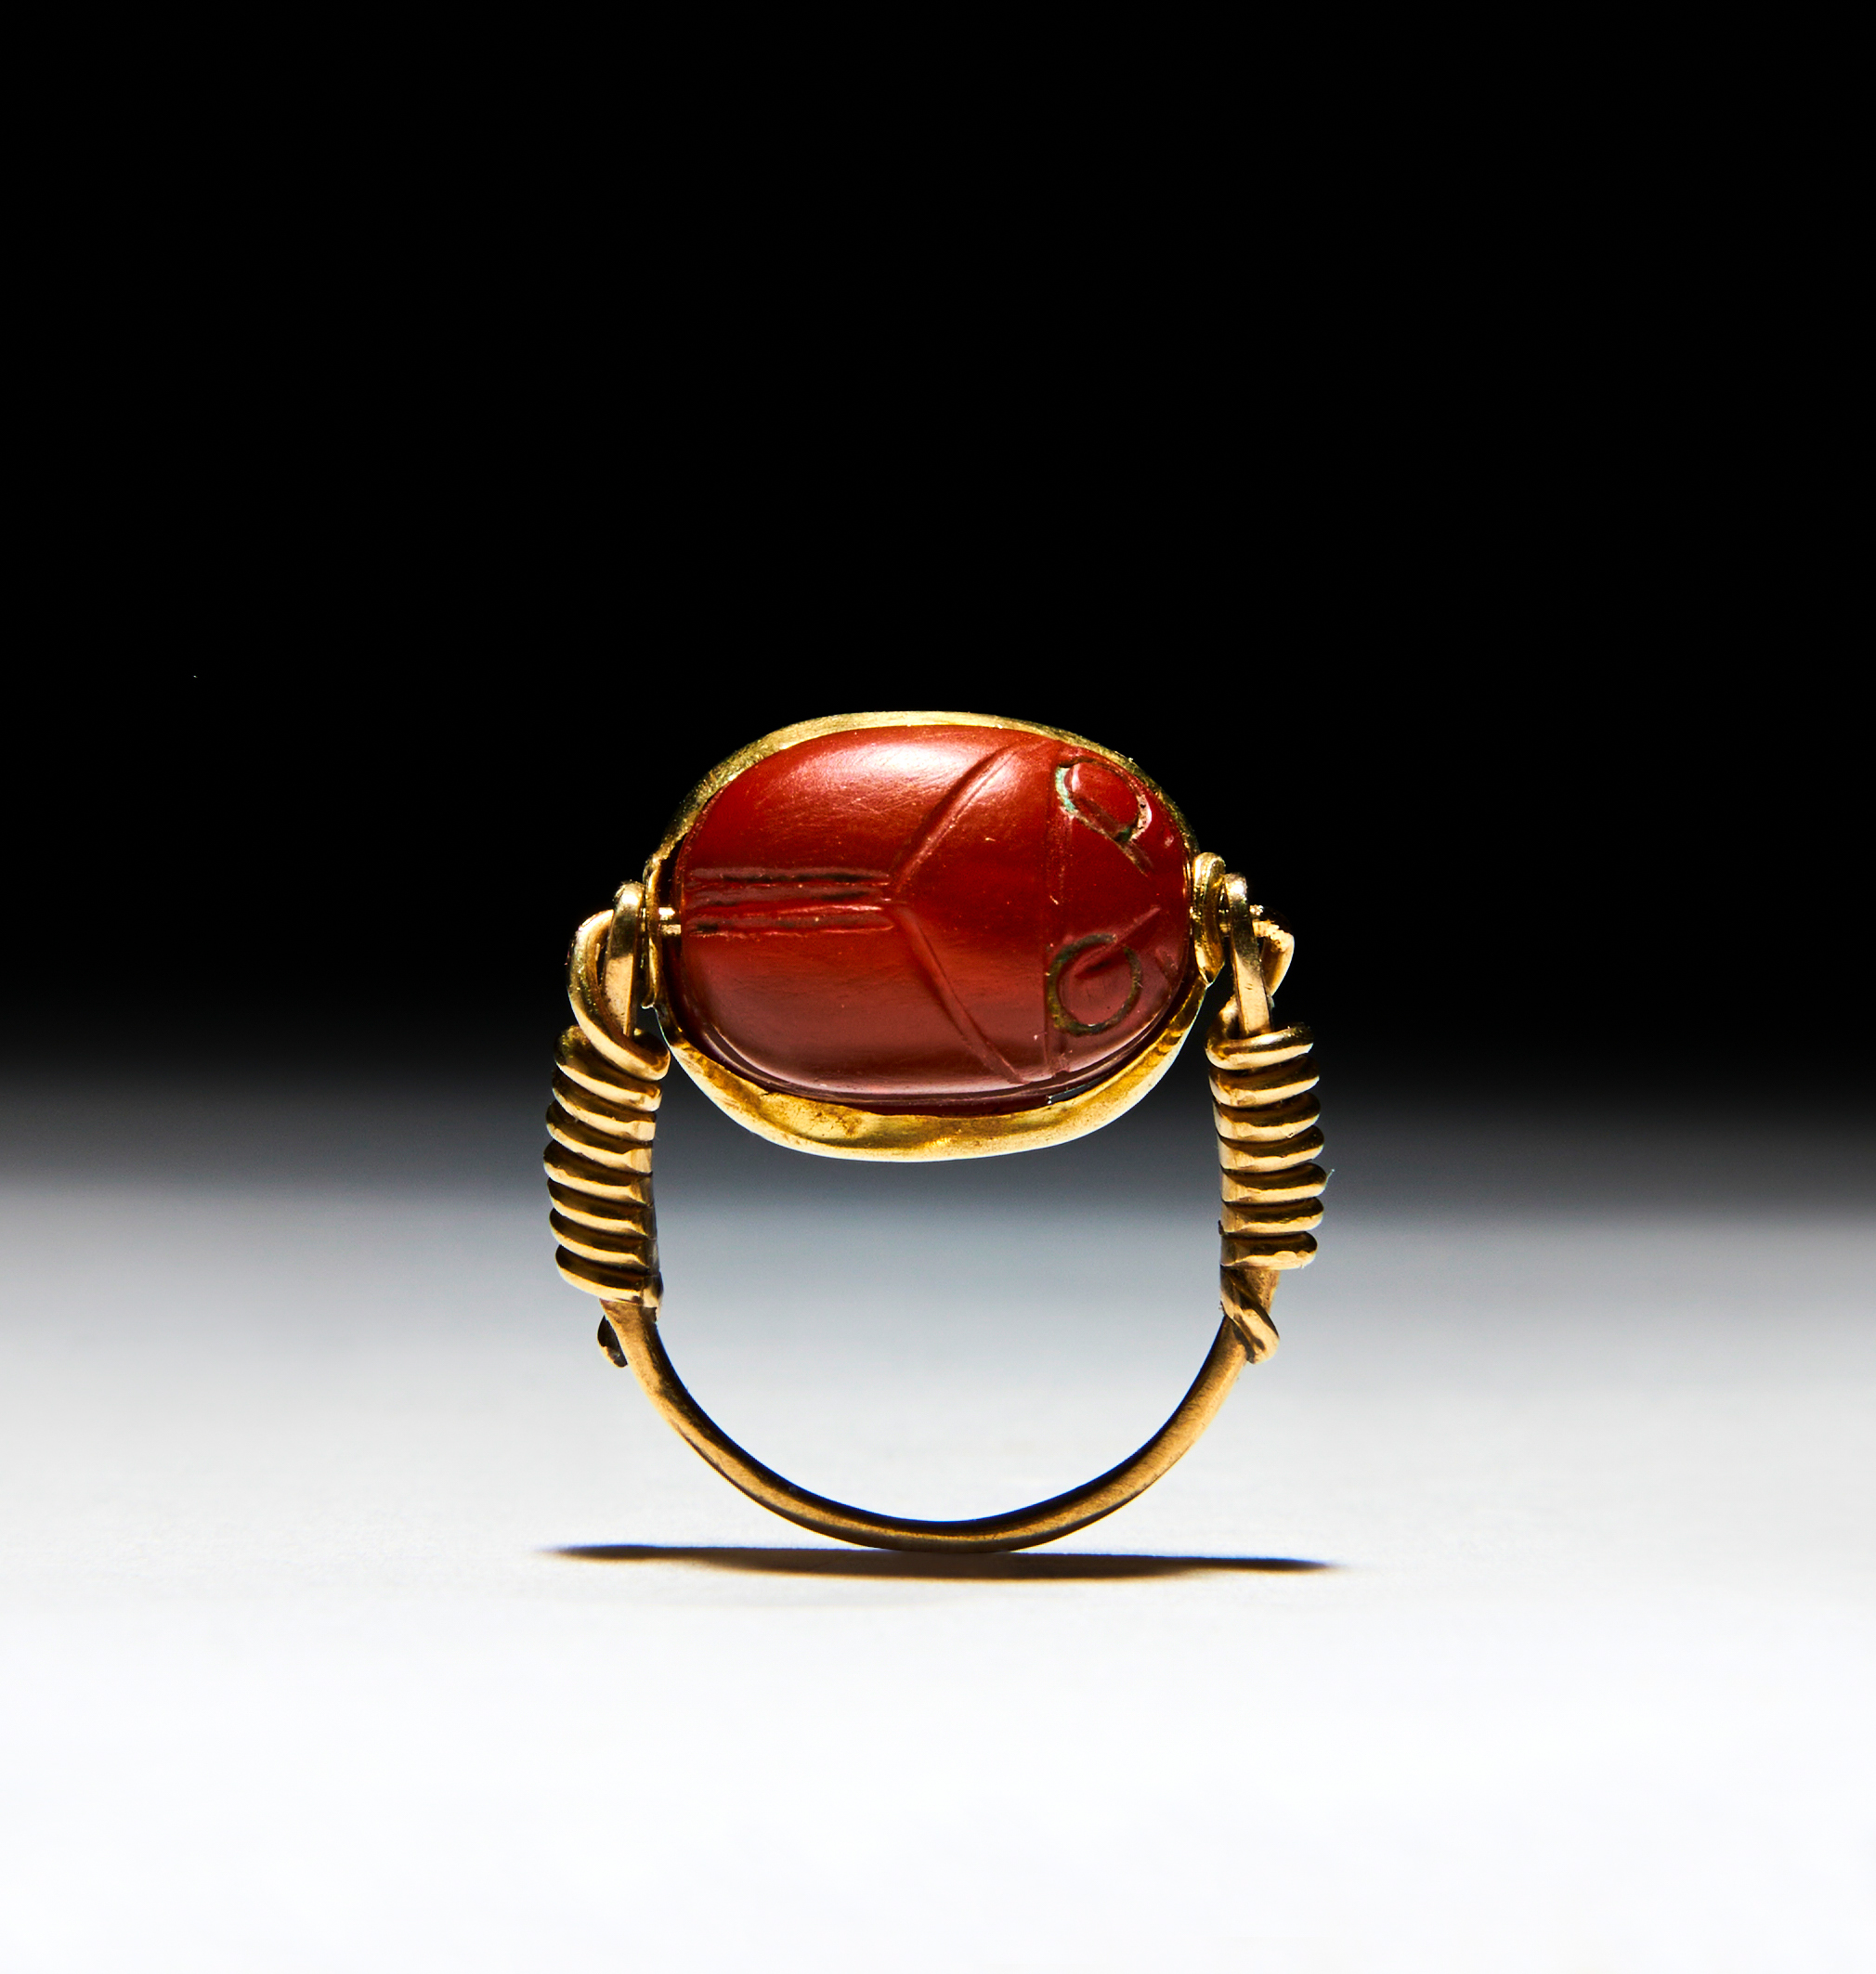 AN EAST GREEK GOLD AND CARNELIAN SCARAB FINGER RING ARCHAIC PERIOD, CIRCA LATE 6TH CENTURY B.C.